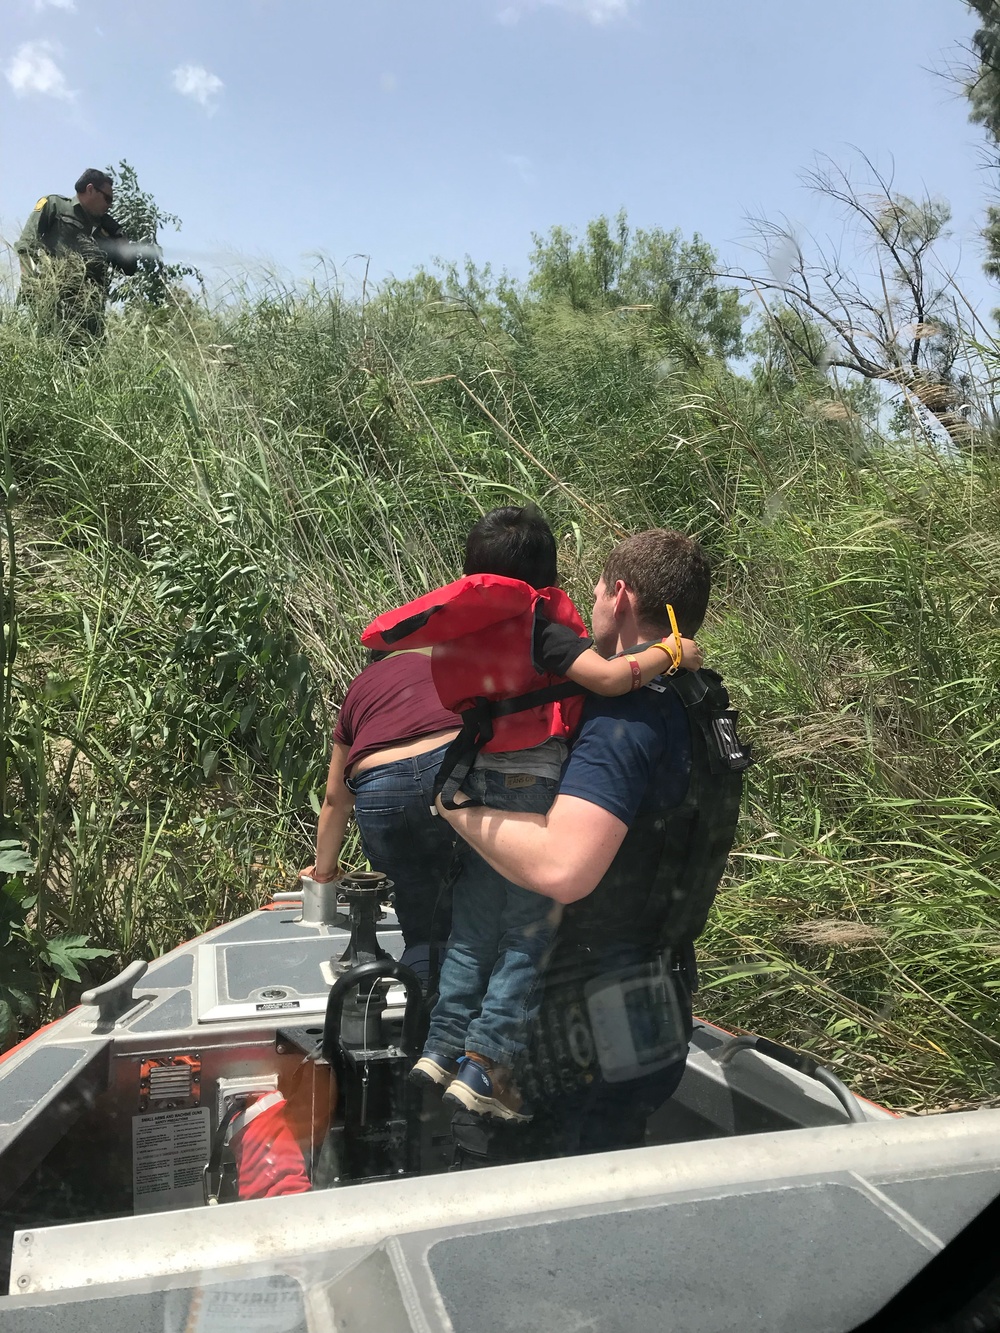 Rescuers on the Rio Grande: Coast Guard team saves lives at the border 